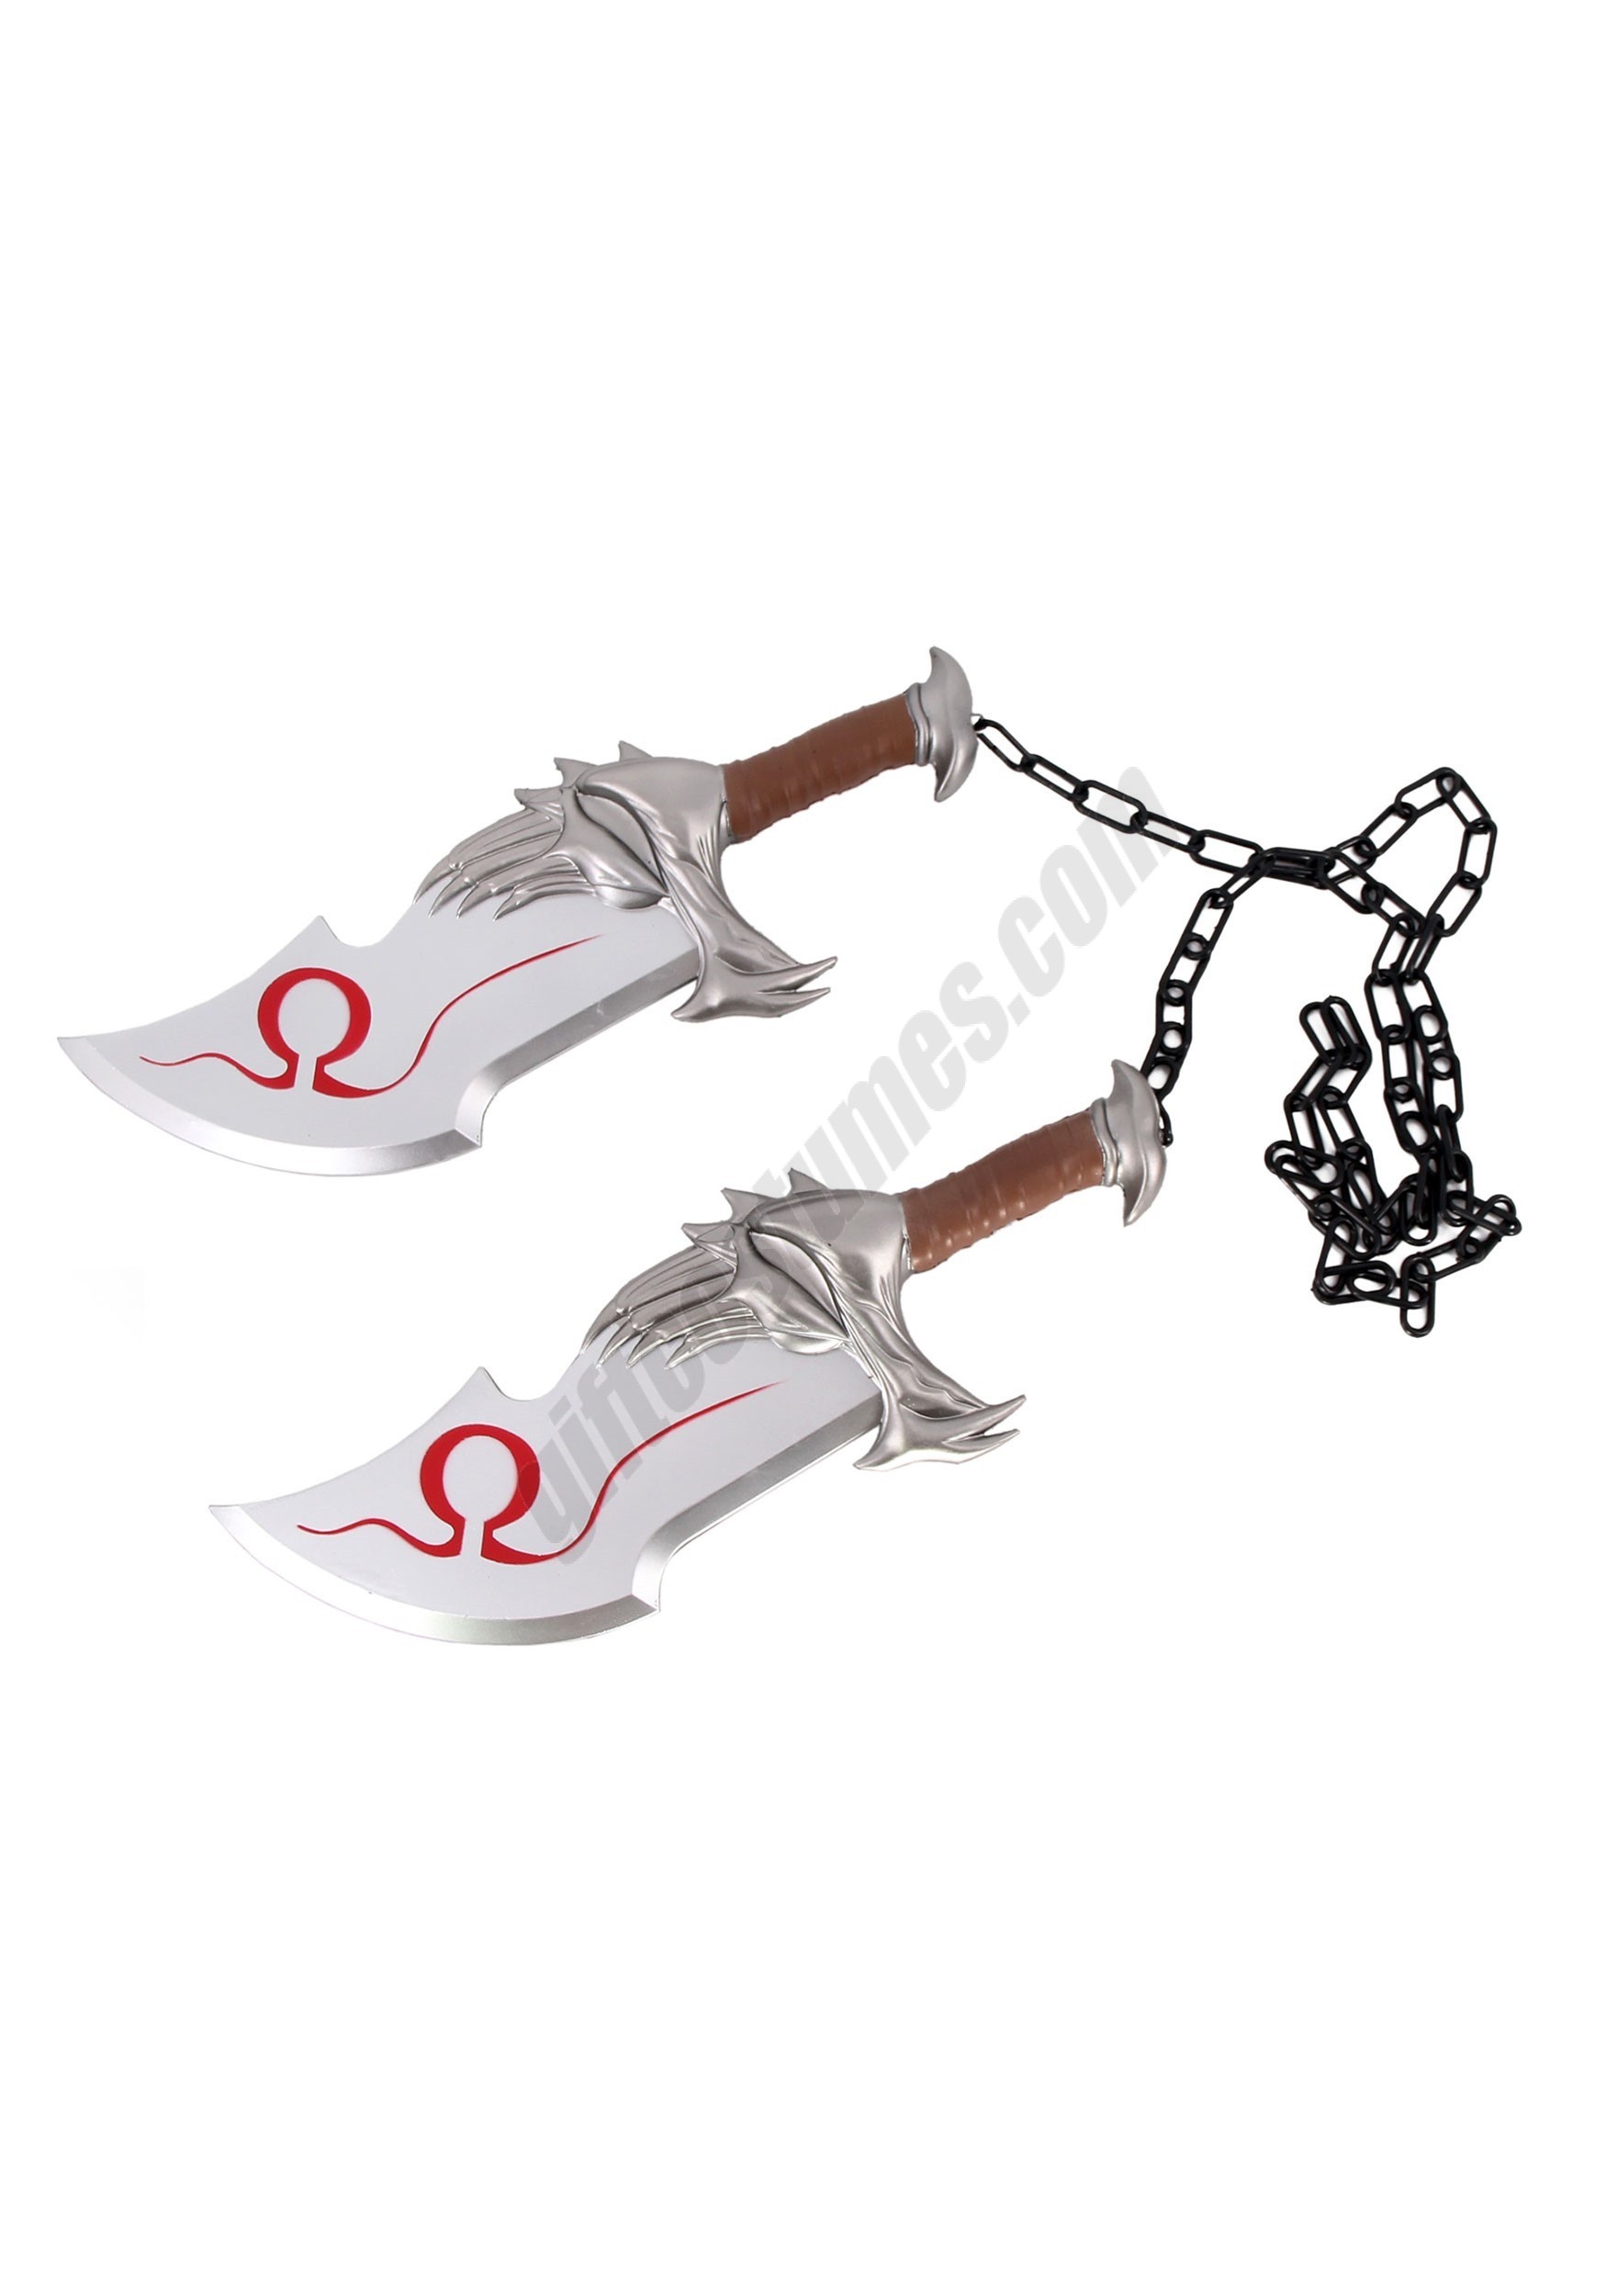 God Of War Blades of Chaos Accessory Promotions - God Of War Blades of Chaos Accessory Promotions